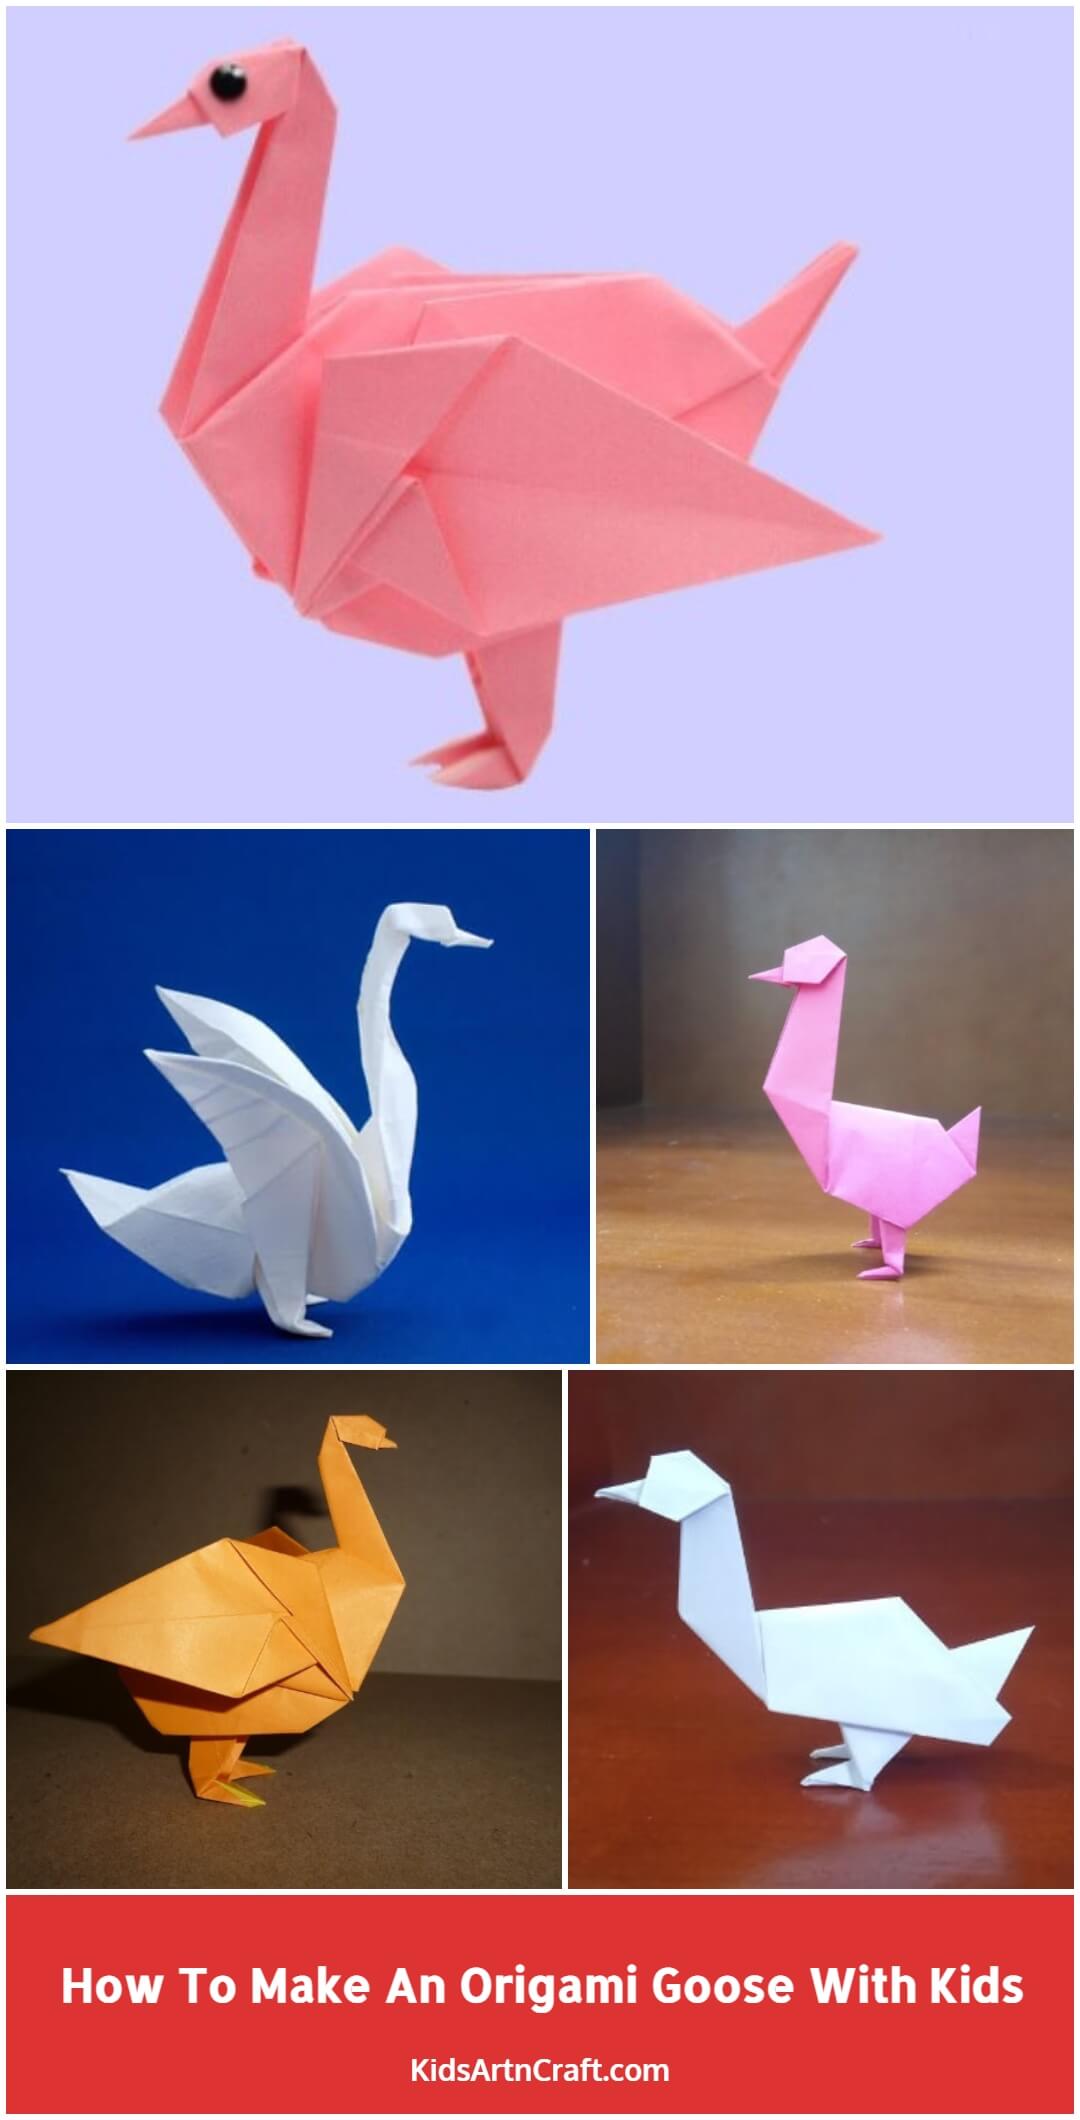 How To Make An Origami Goose With Kids